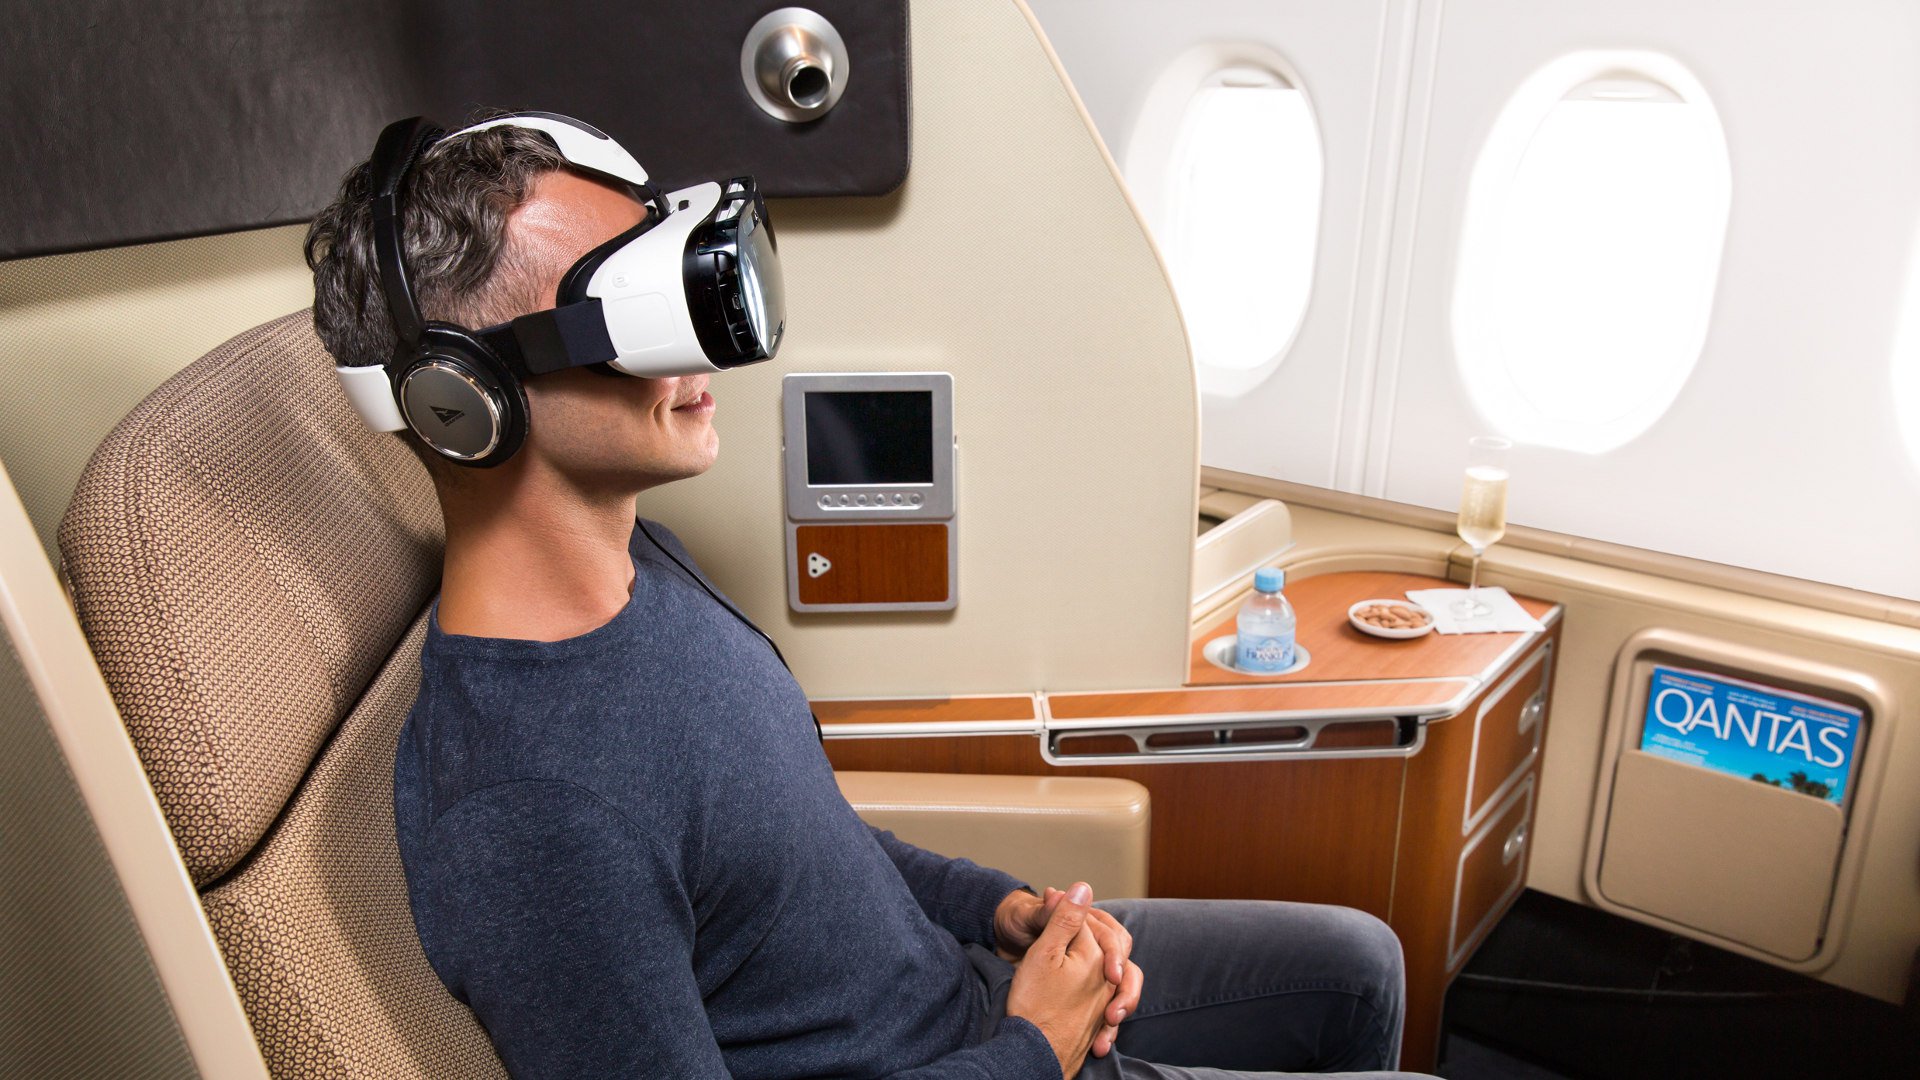 Quantas Airlines To Use Gear VR For In-Flight Entertainment